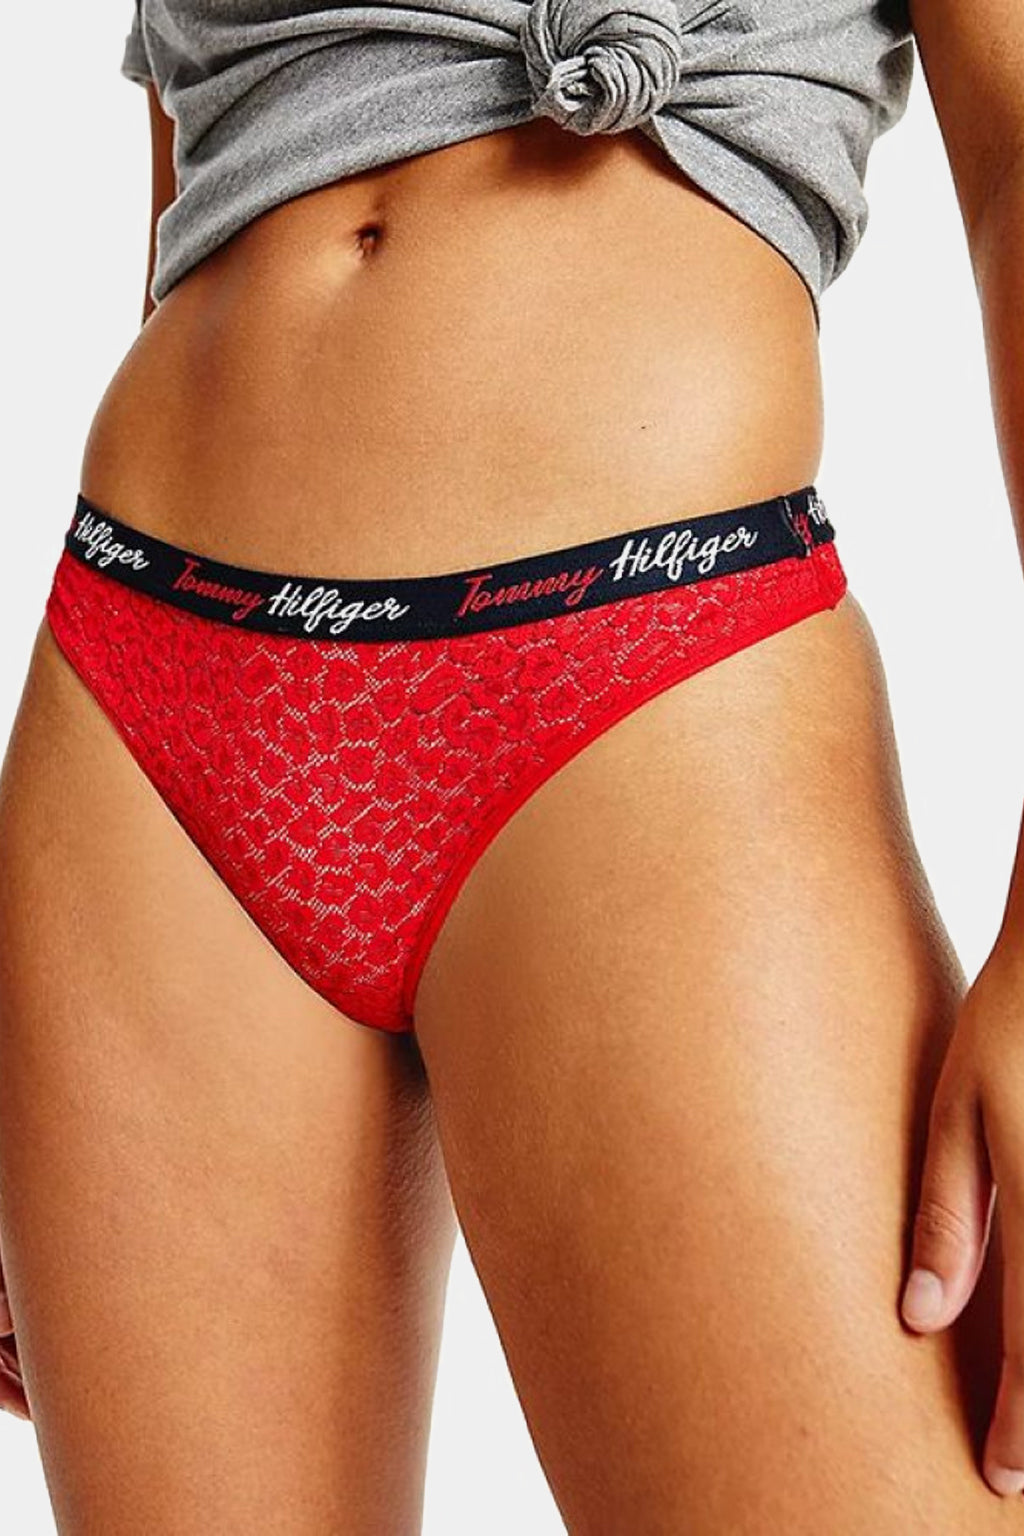 Tommy Hilfiger - Thongs 5-Pack Holiday Gift Box